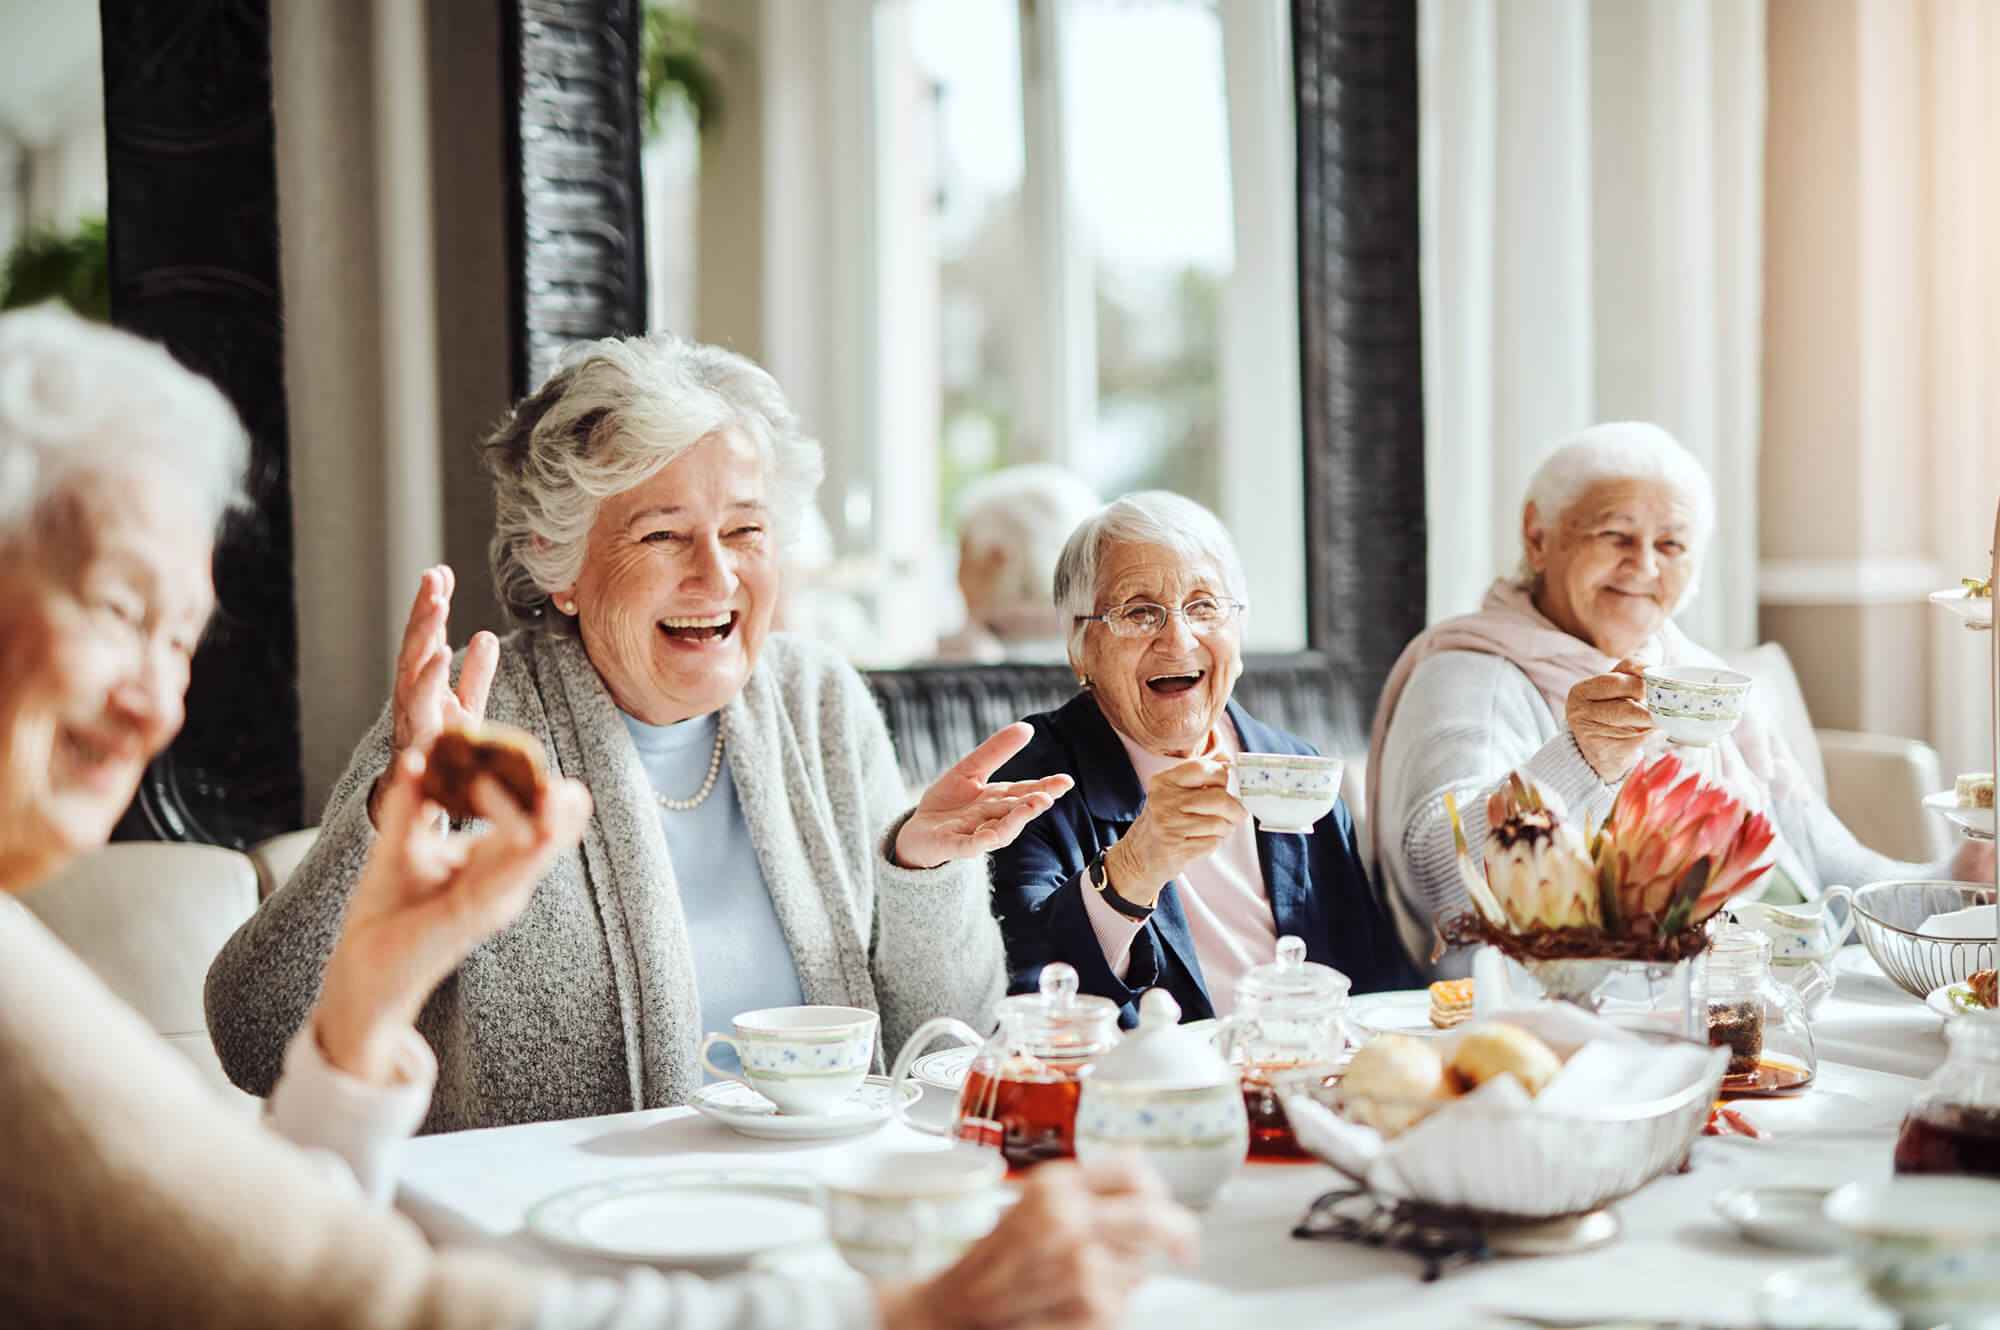 Elderly women laughing at a table